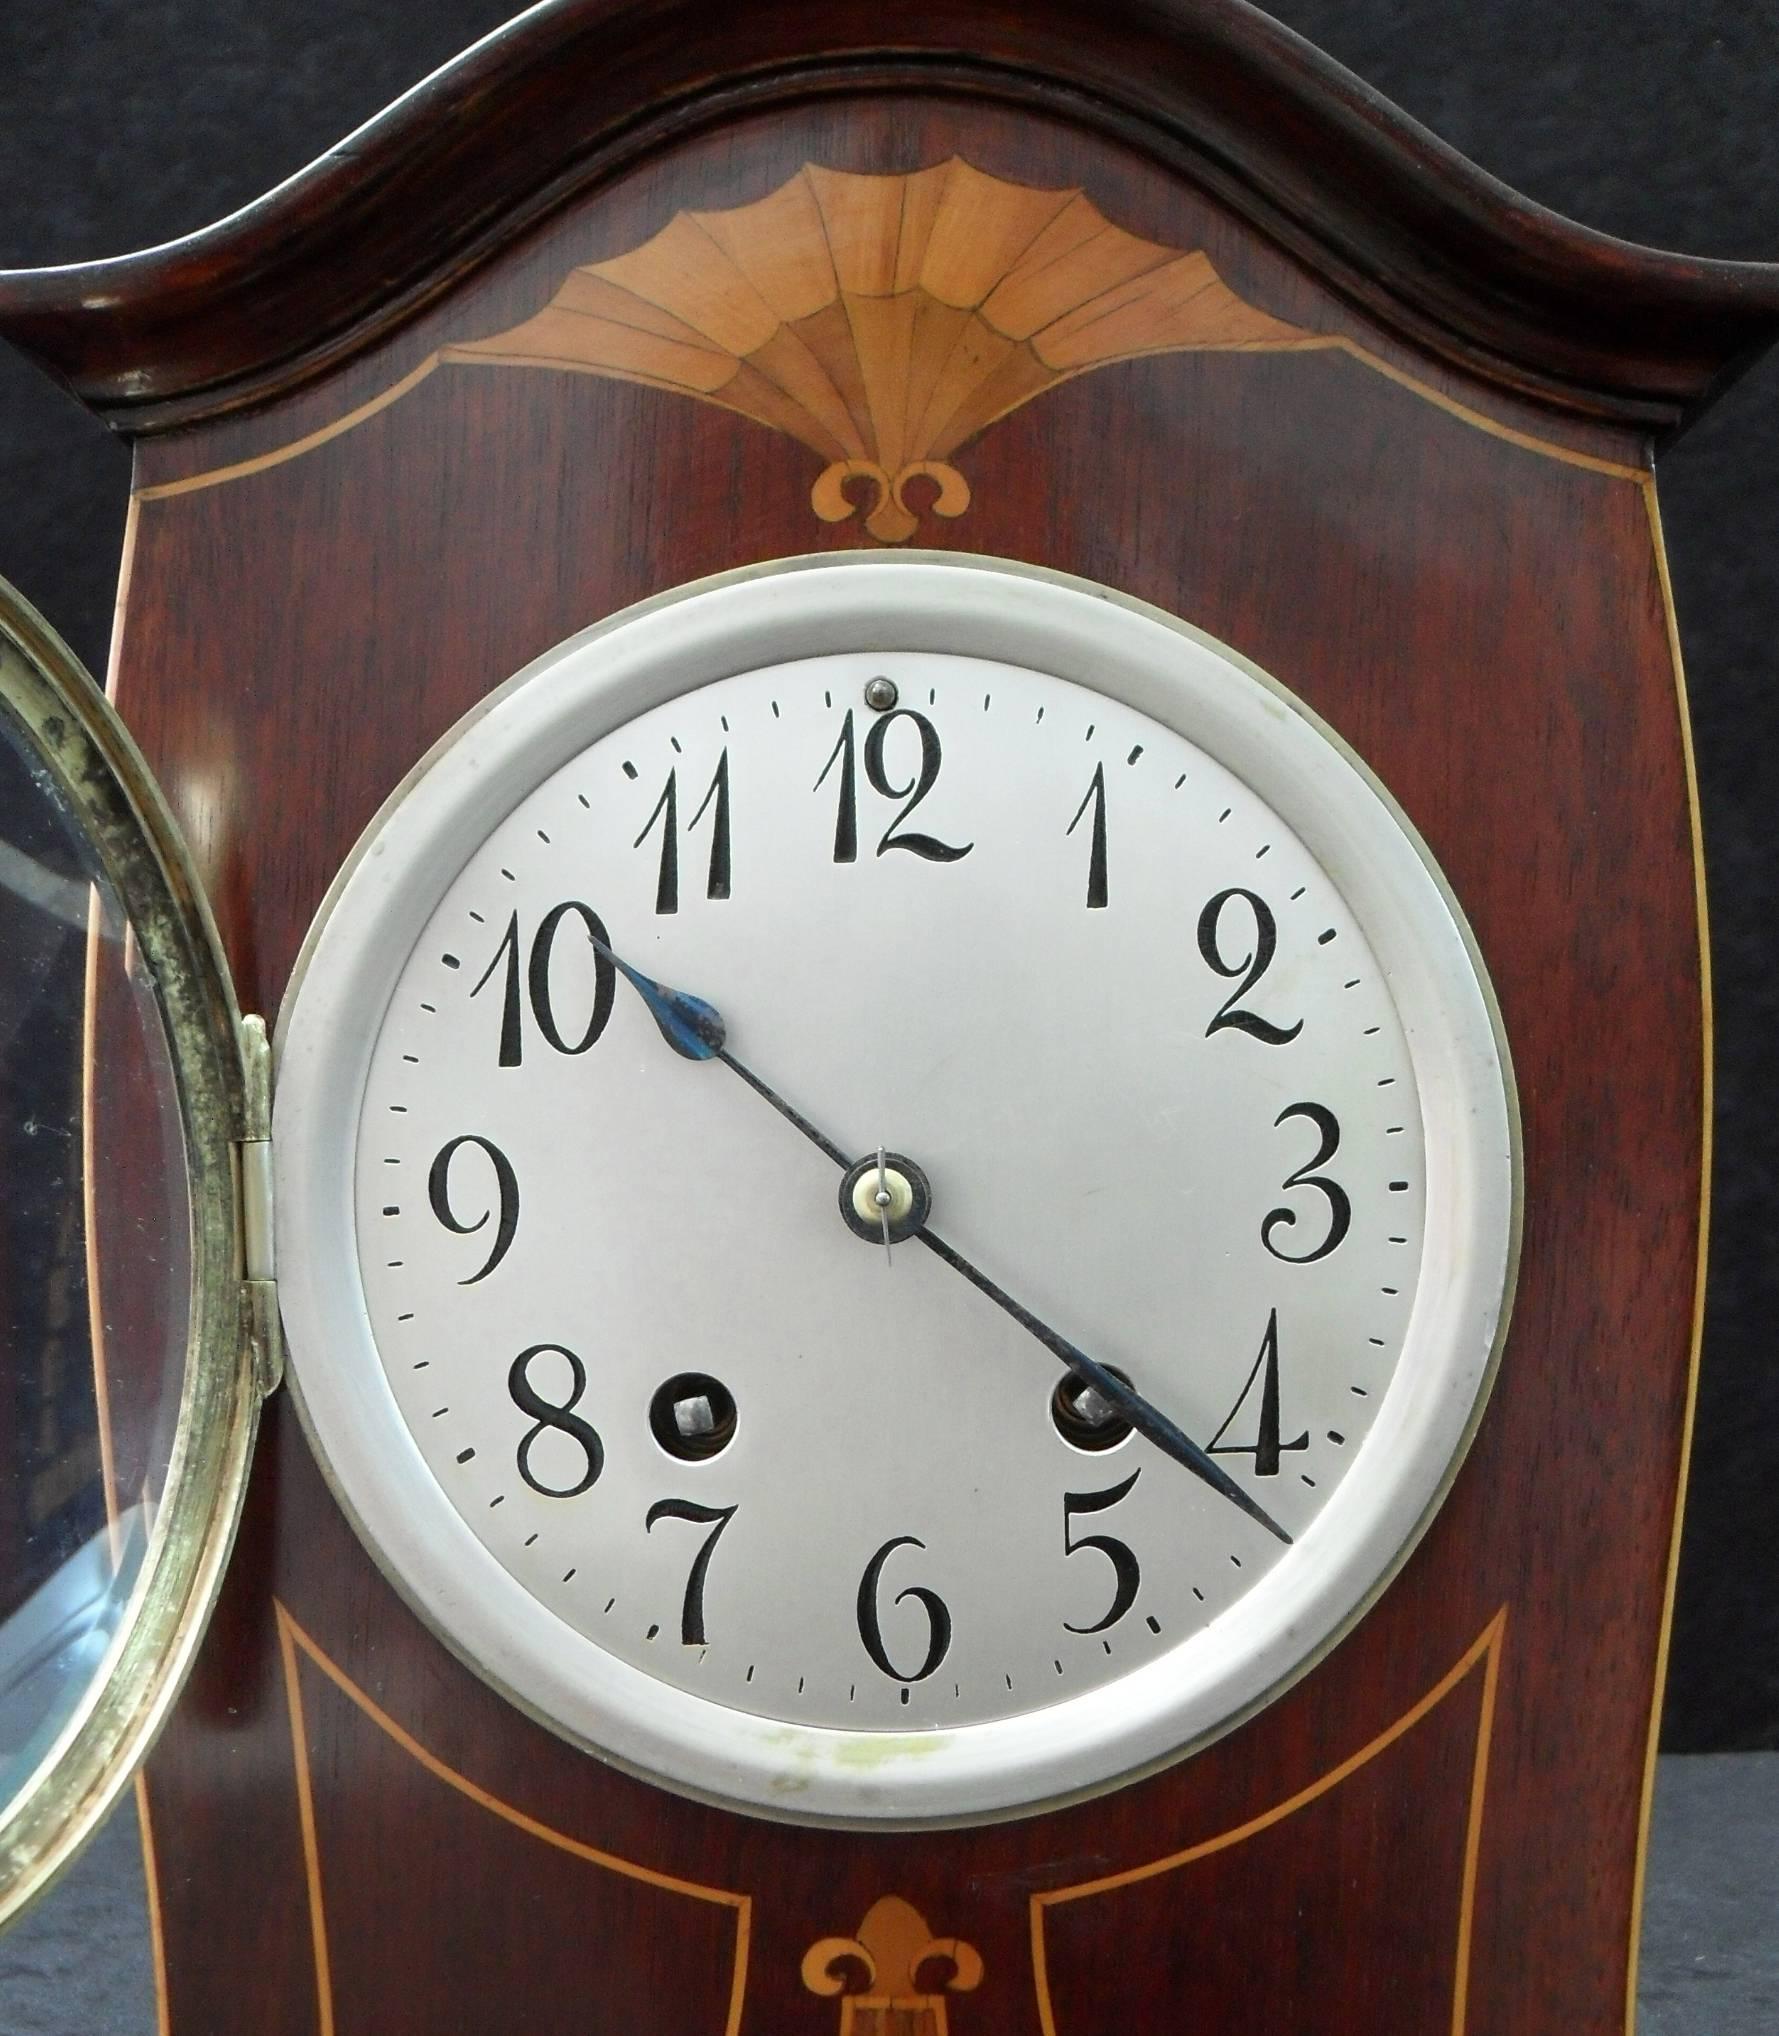 A decorative German Art Nouveau mahogany mantel clock with satinwood fan and boxwood string inlay to the front of the case, the clock has a silvered 5 inch dial with a German eight day Lenzkirch movement which strikes the hours and half hours on a